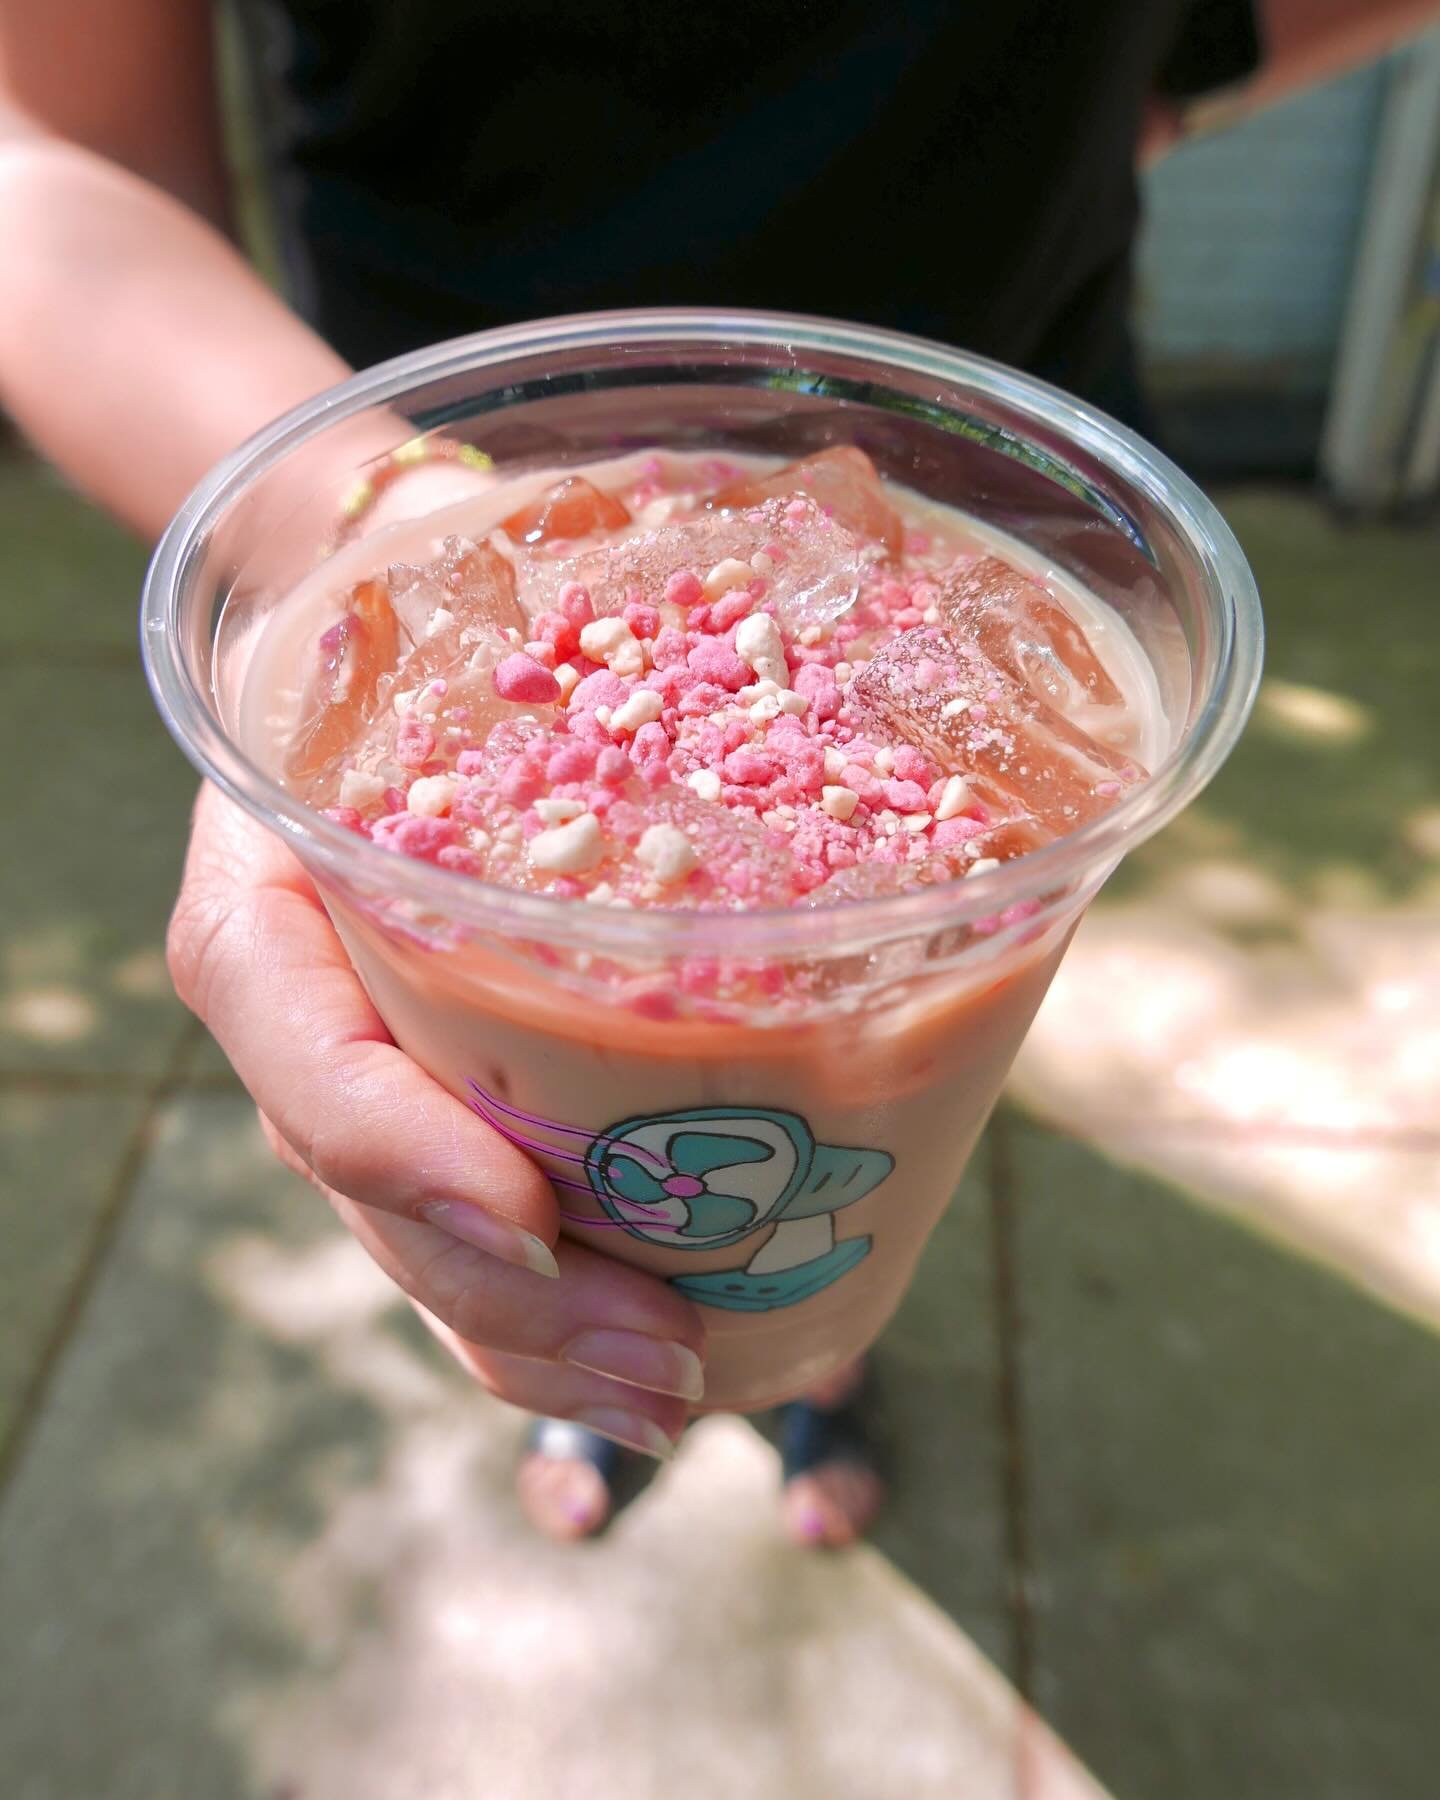 Strawberry Pop-Tart latte 🍓. Alll the nostalgia of your childhood but with more caffeine. Get it 🥵 or 🧊. 

‼️IMPORTANT‼️ Do you toast your p-tarts? 👀